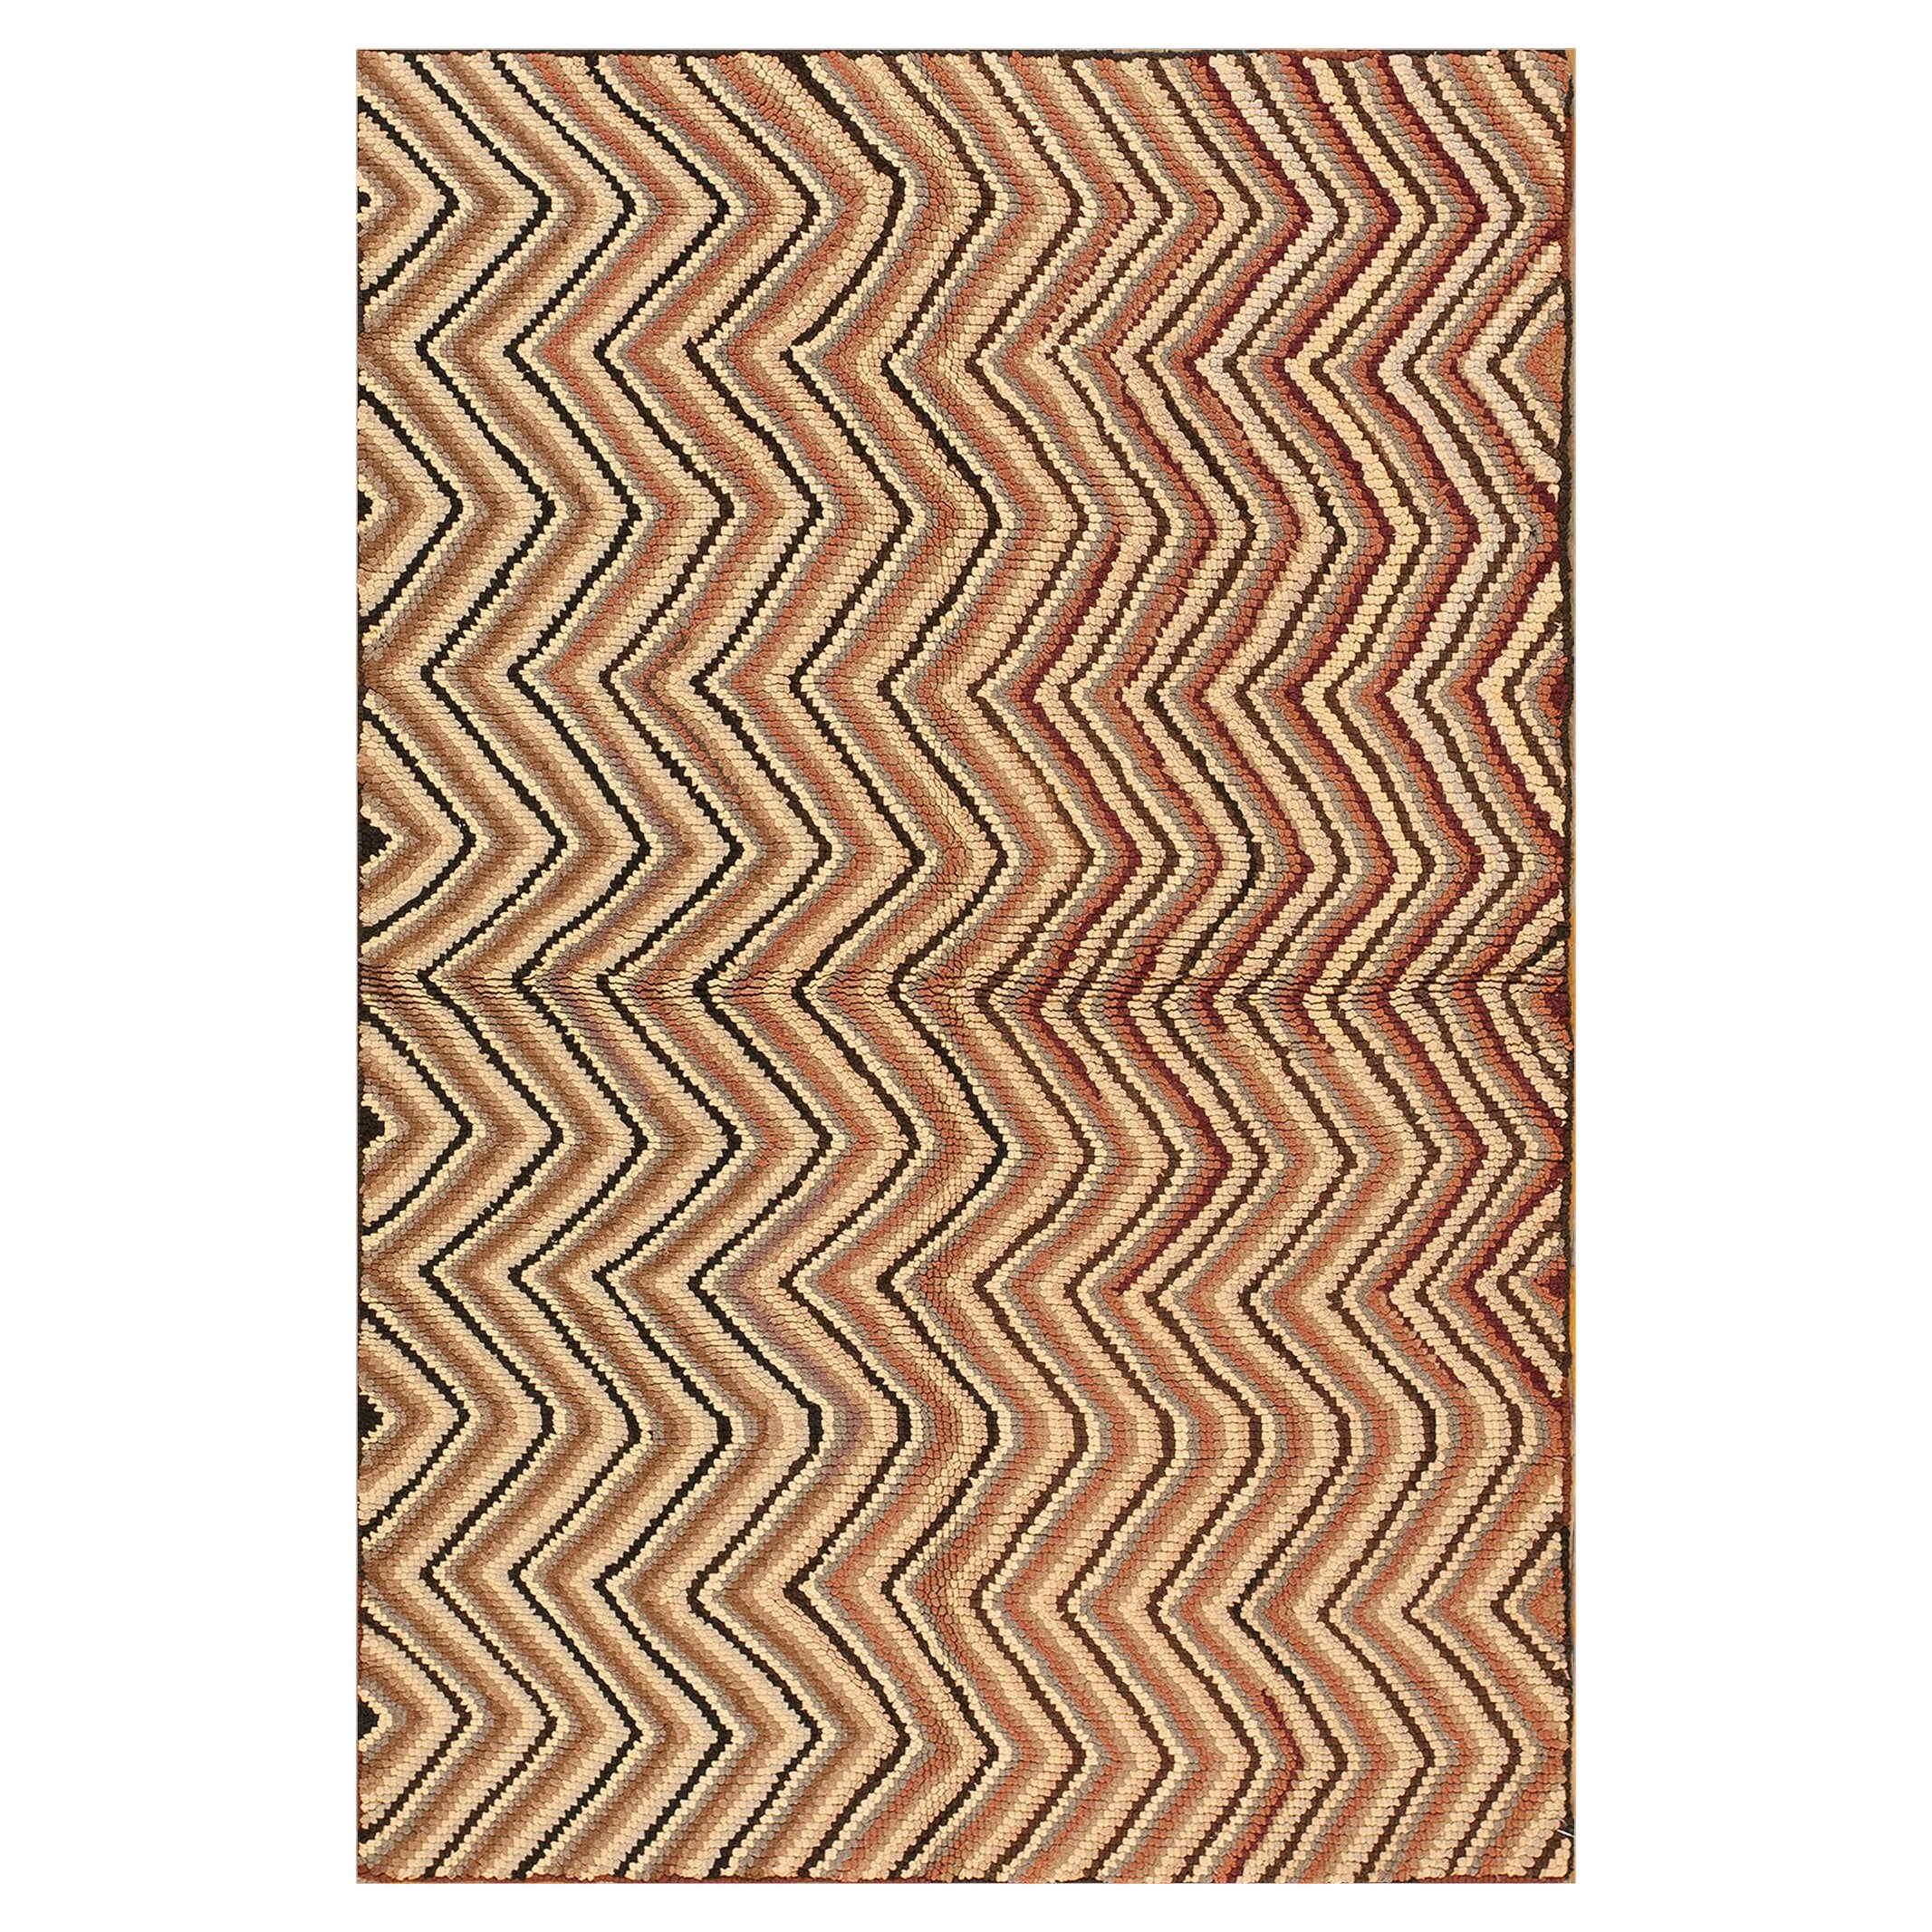 Mid 20th Century American Hooked Rug ( 3'9" x 6'3" - 114 x 191 )